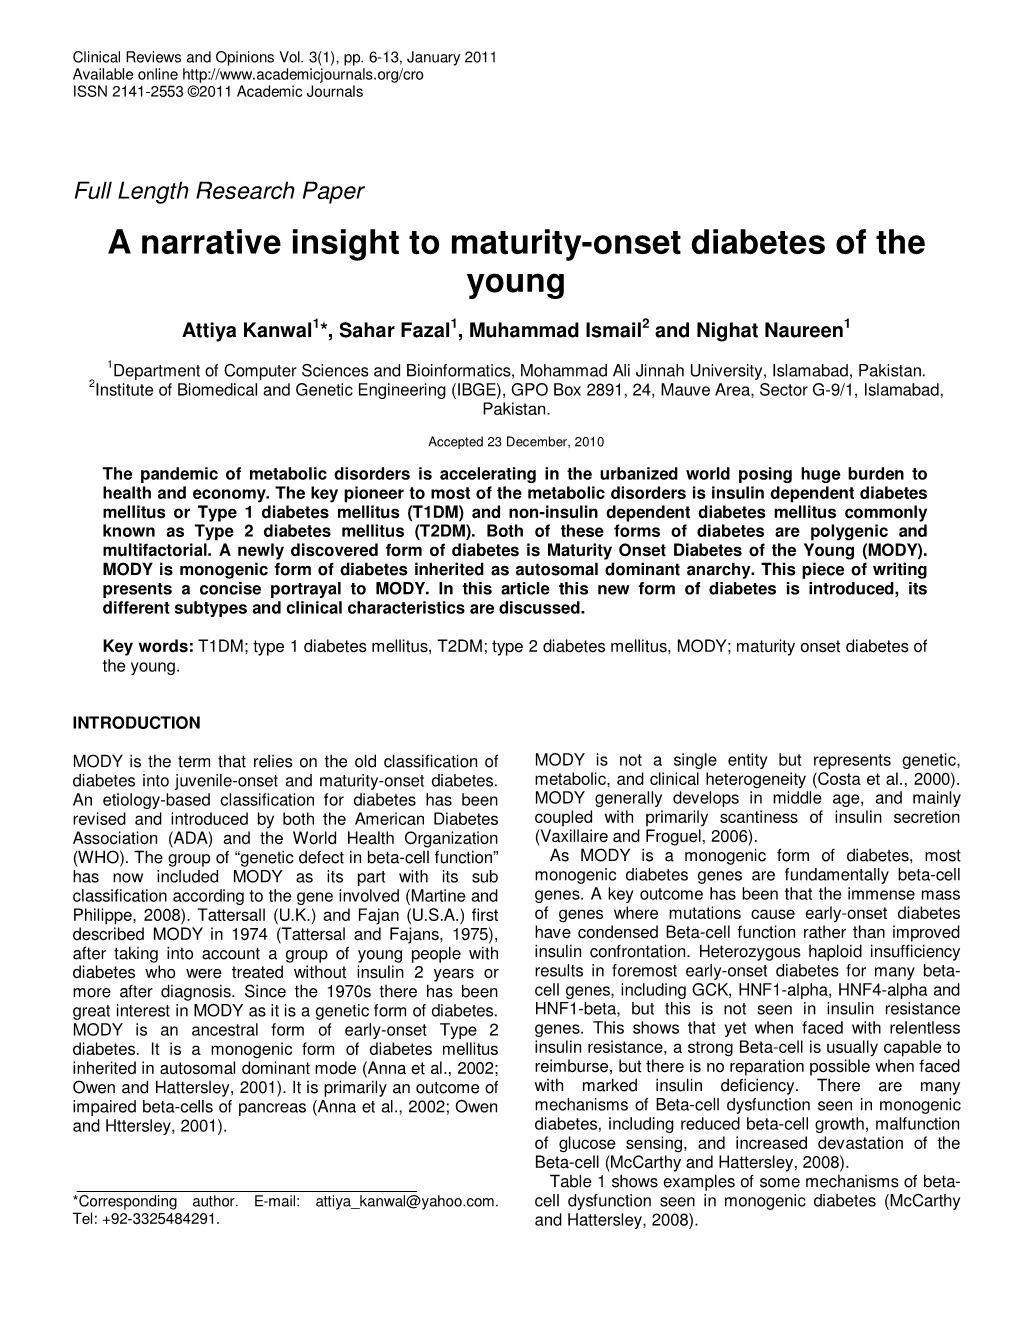 A Narrative Insight to Maturity-Onset Diabetes of the Young